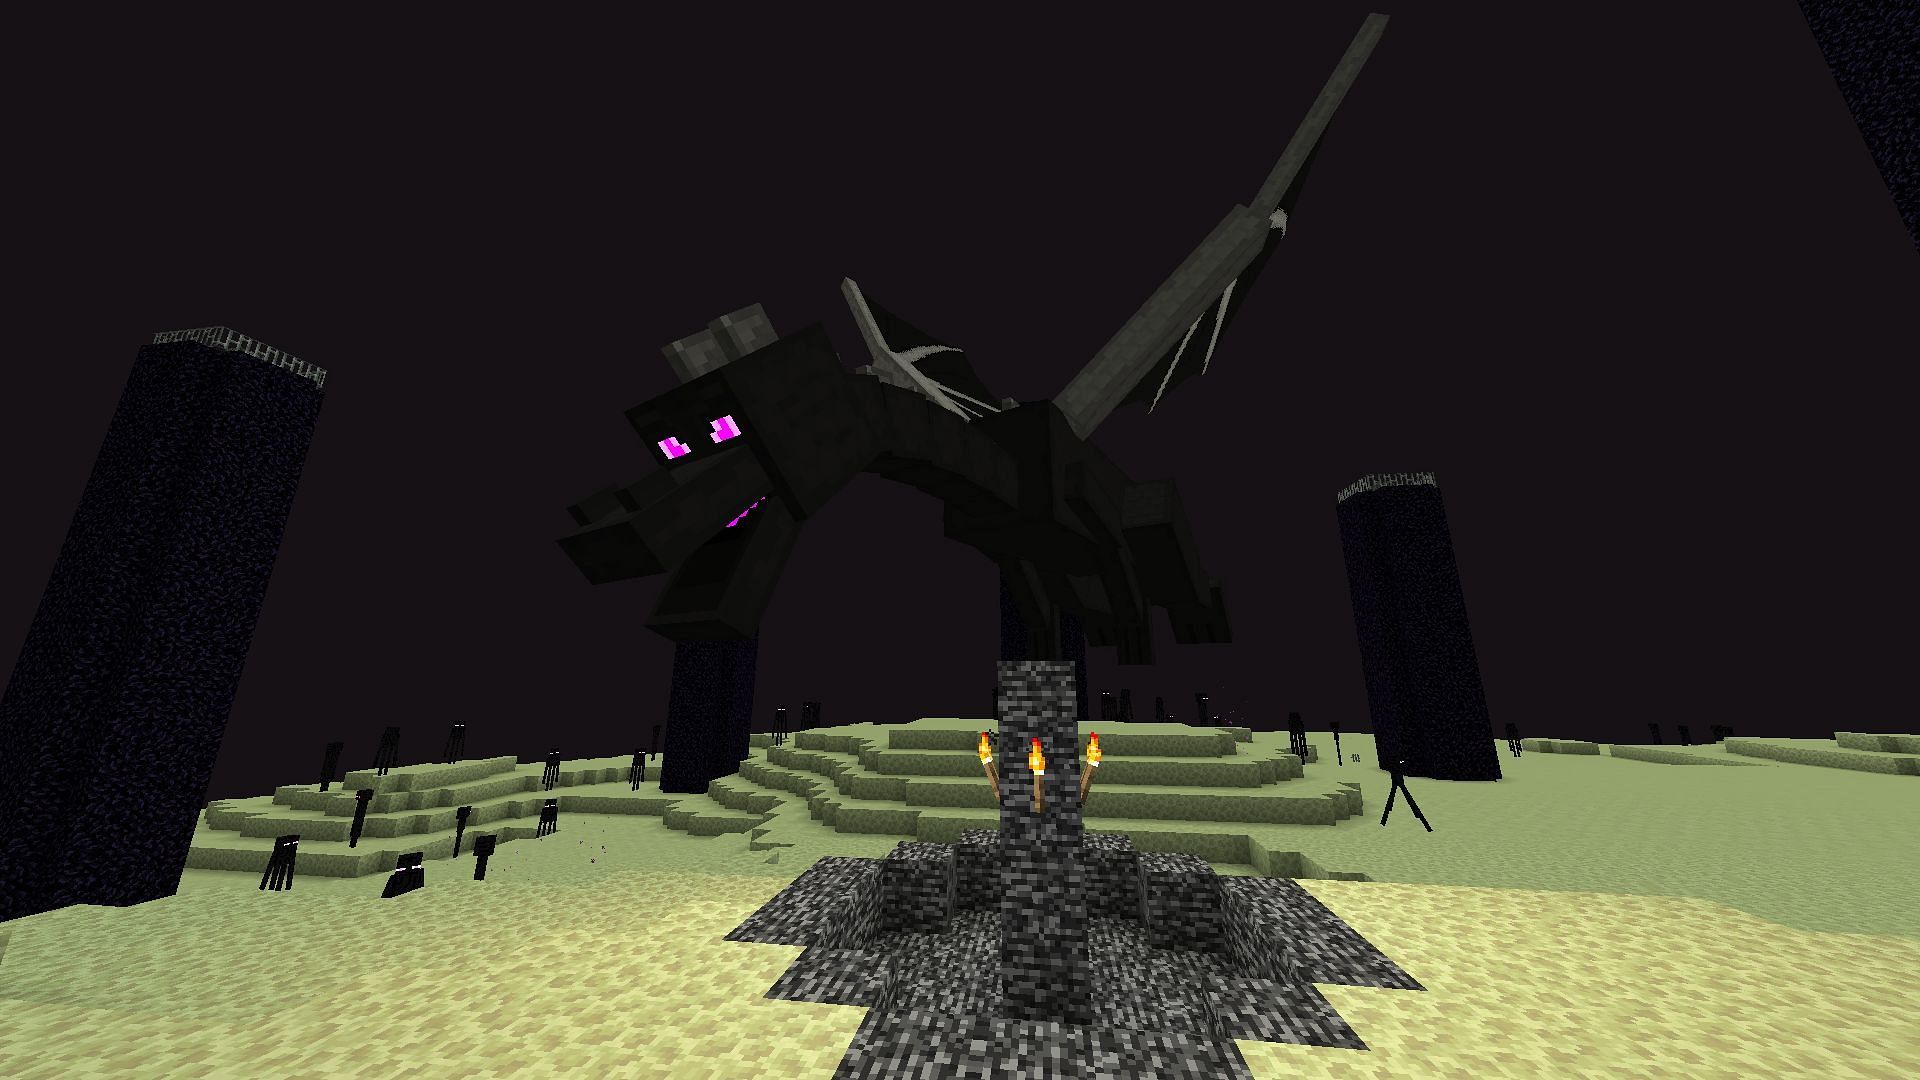 Minecraft players shows complex method to spawn ender dragon in the Minecraft Overworld realm (Image via Mojang)